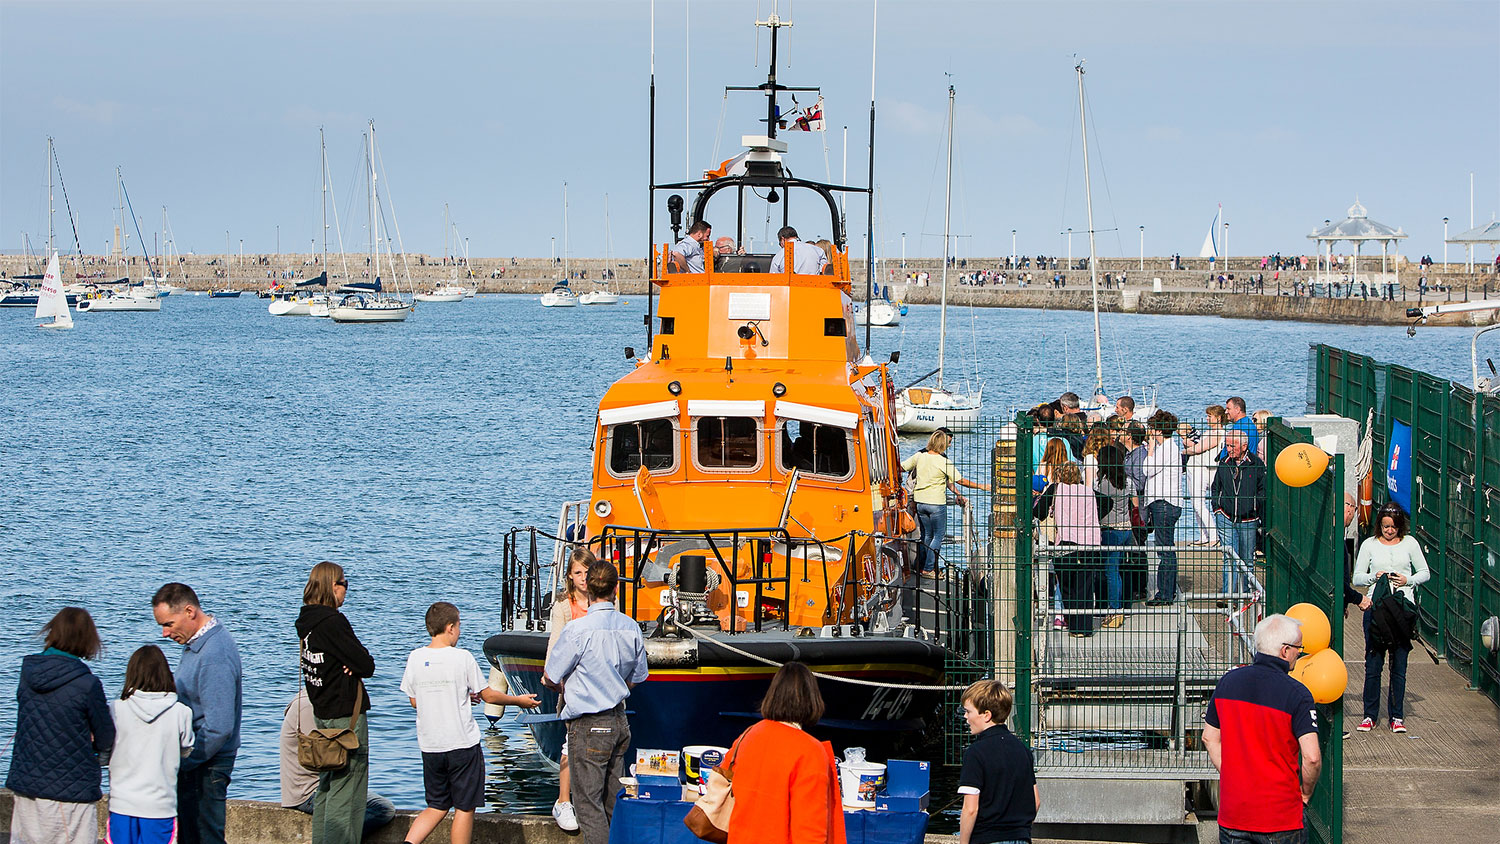 Dun Laoghaire Lifeboat station